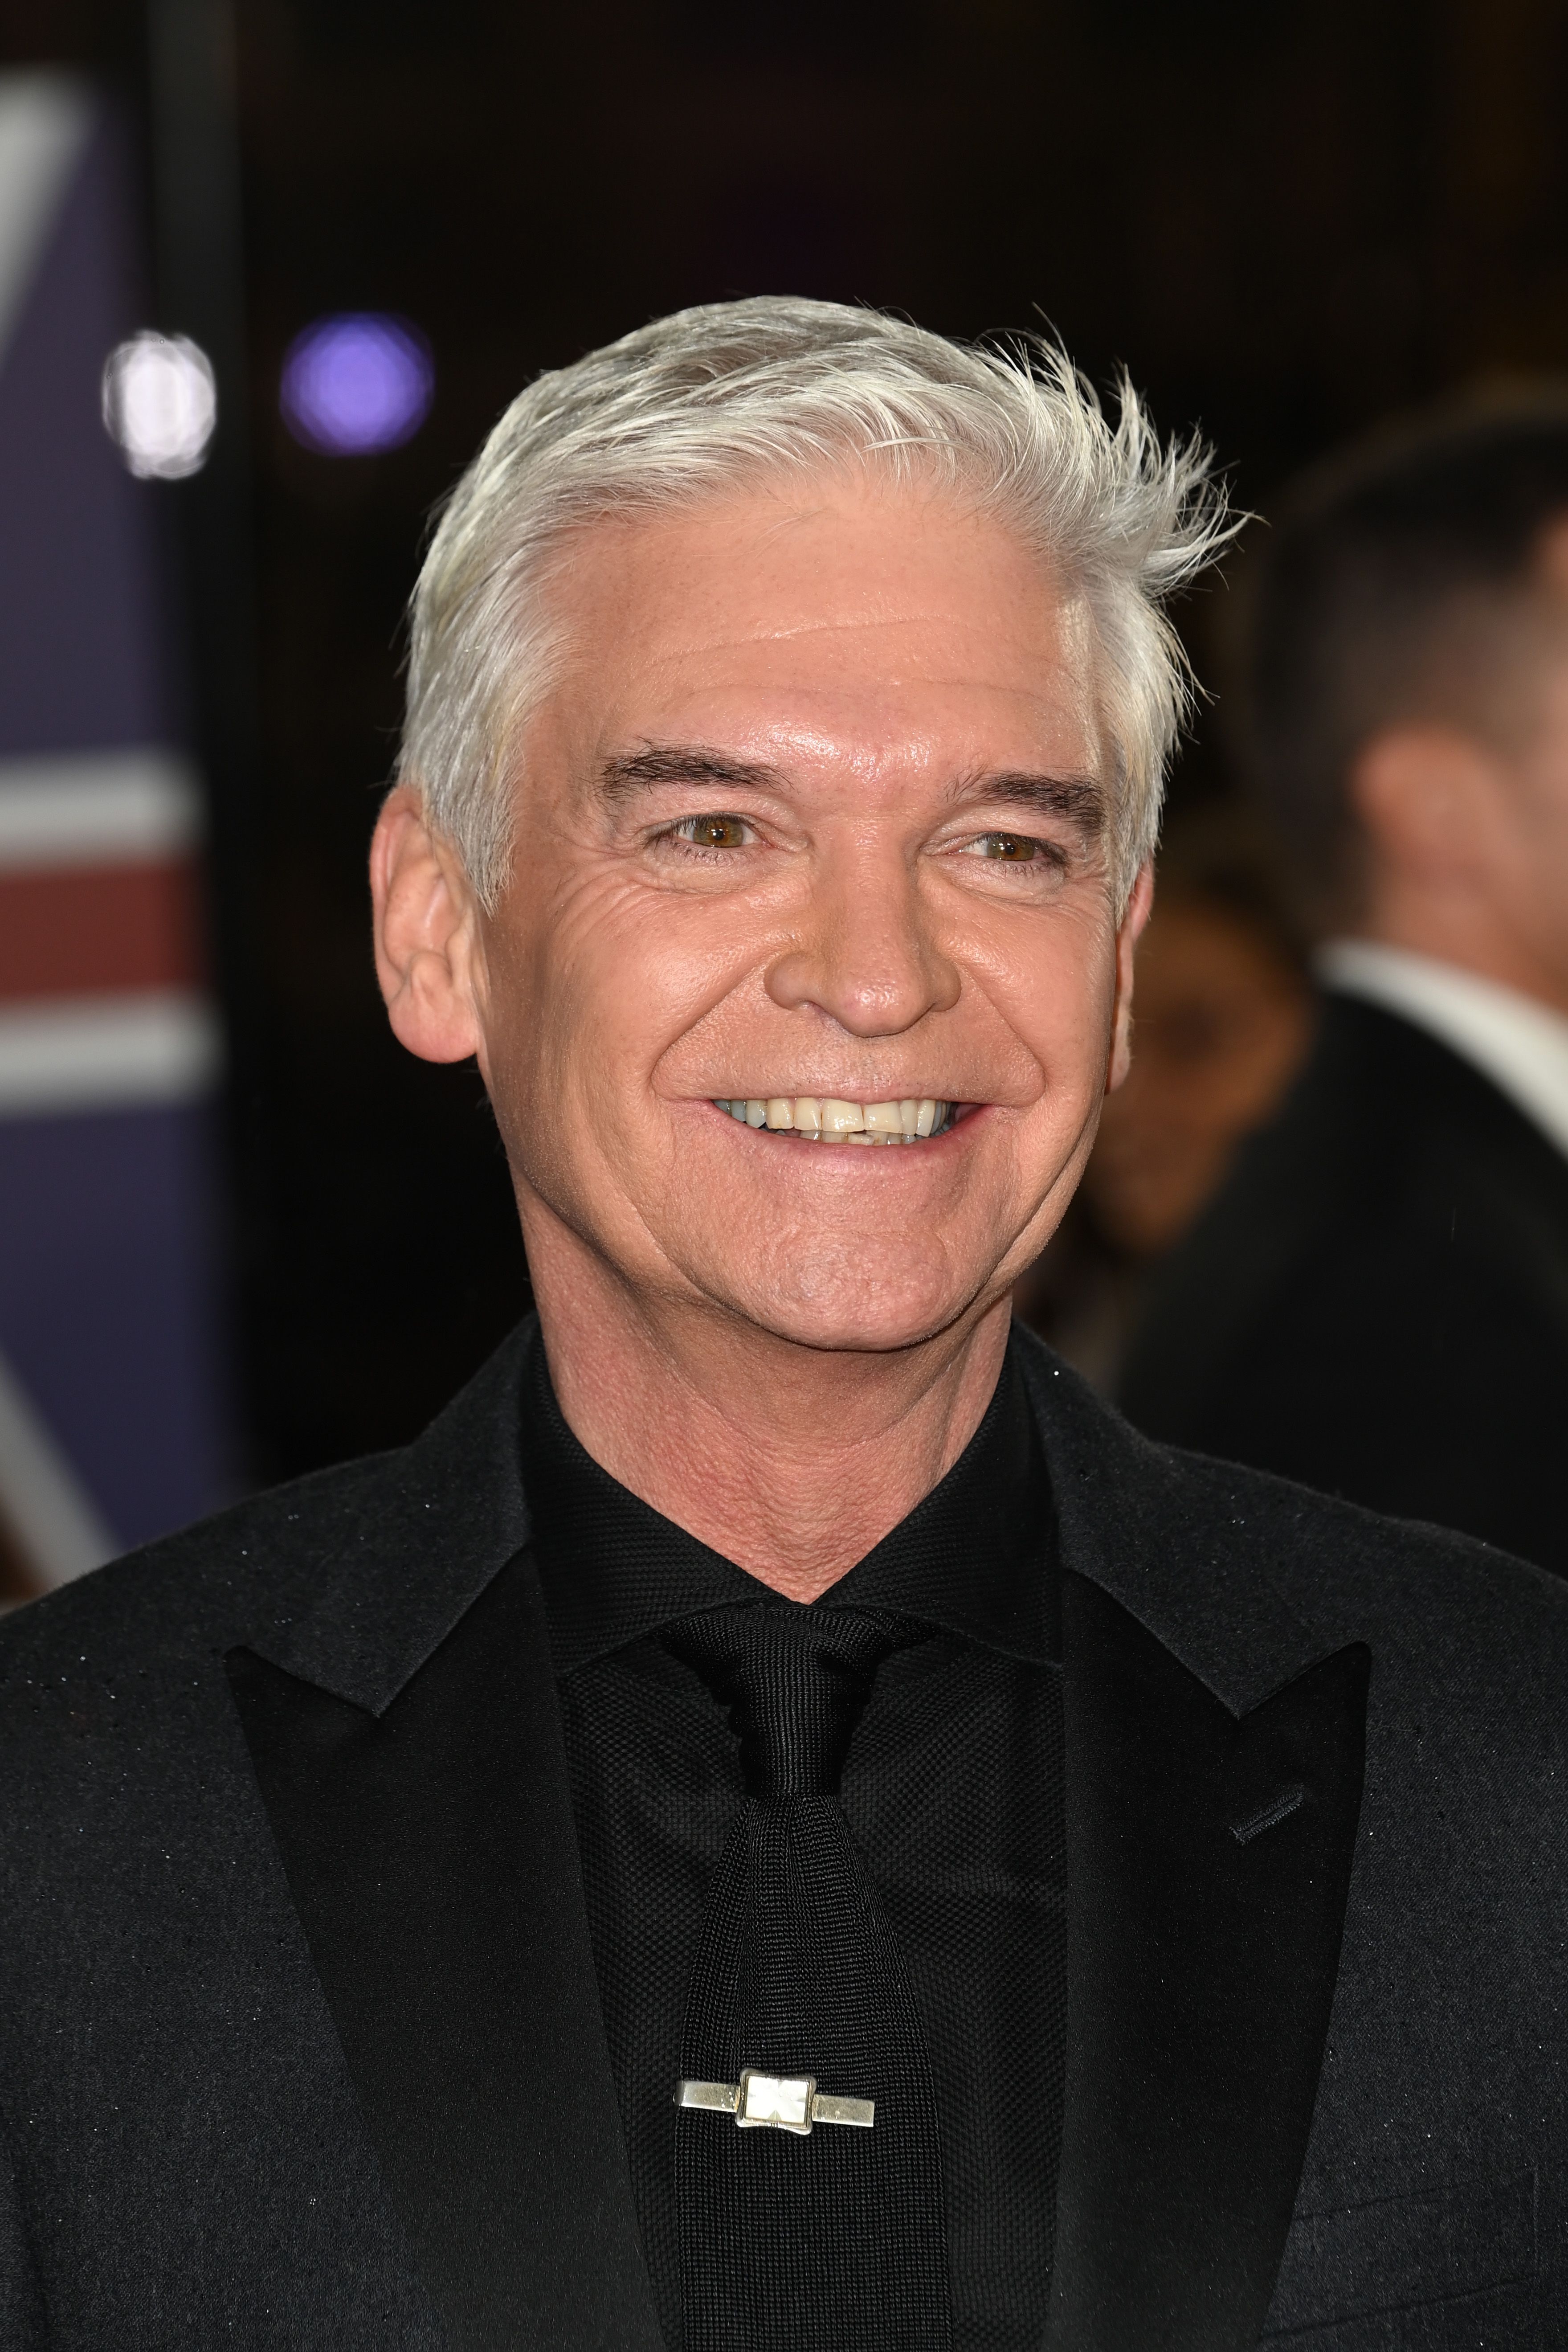 Phillip Schofield at the Daily Mirror Pride of Britain Awards 2022 on October 24, 2022, in London, England. | Source: Getty Images